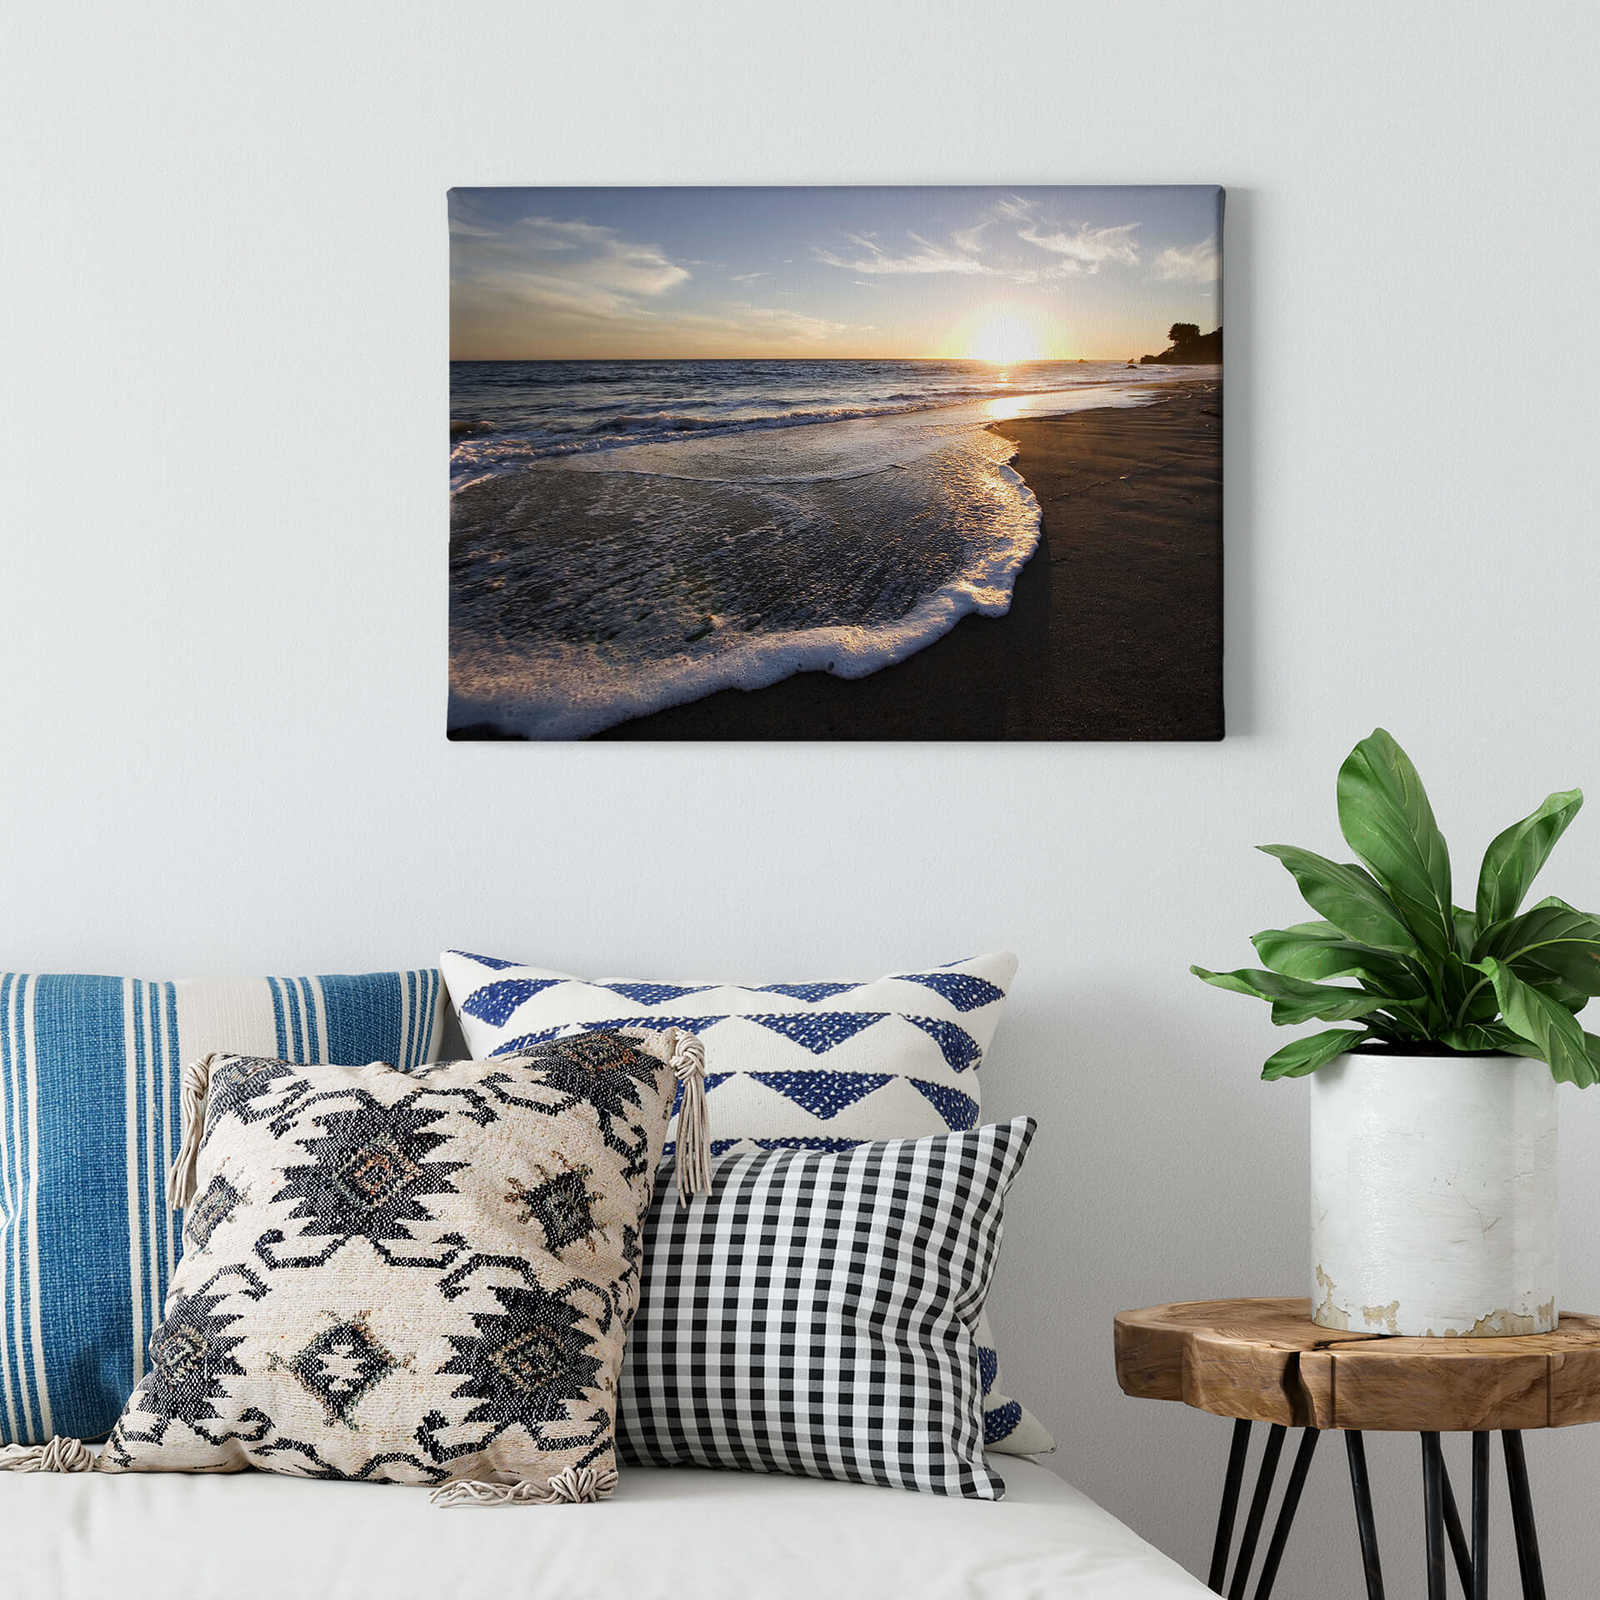             Canvas print bay at sunset, colourful
        